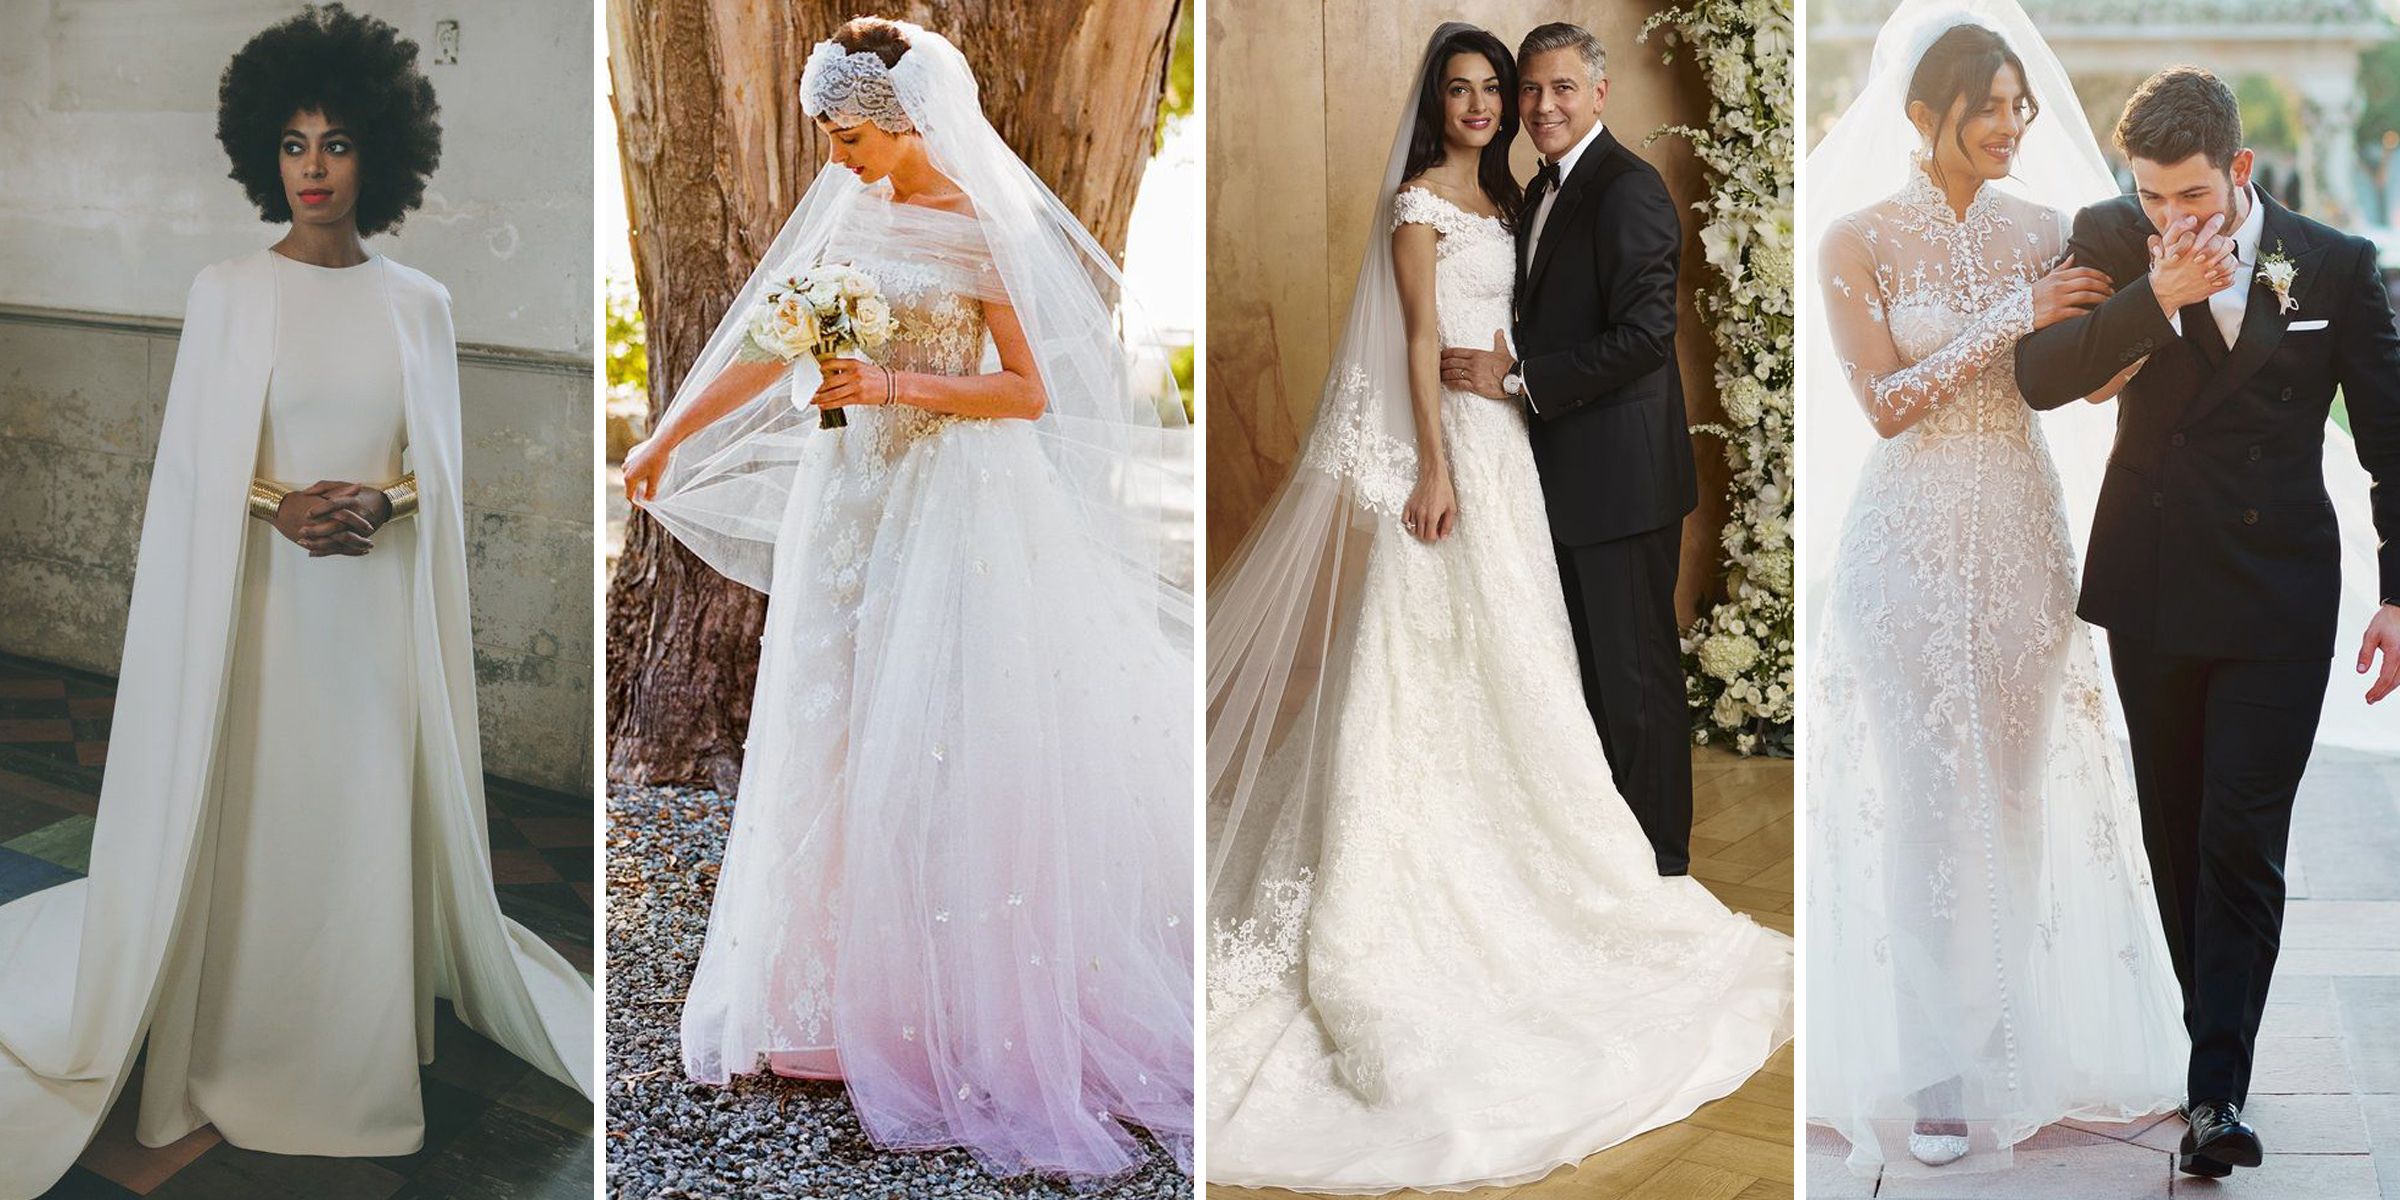 Top 10 wedding dress designers for a unique look on your big day!